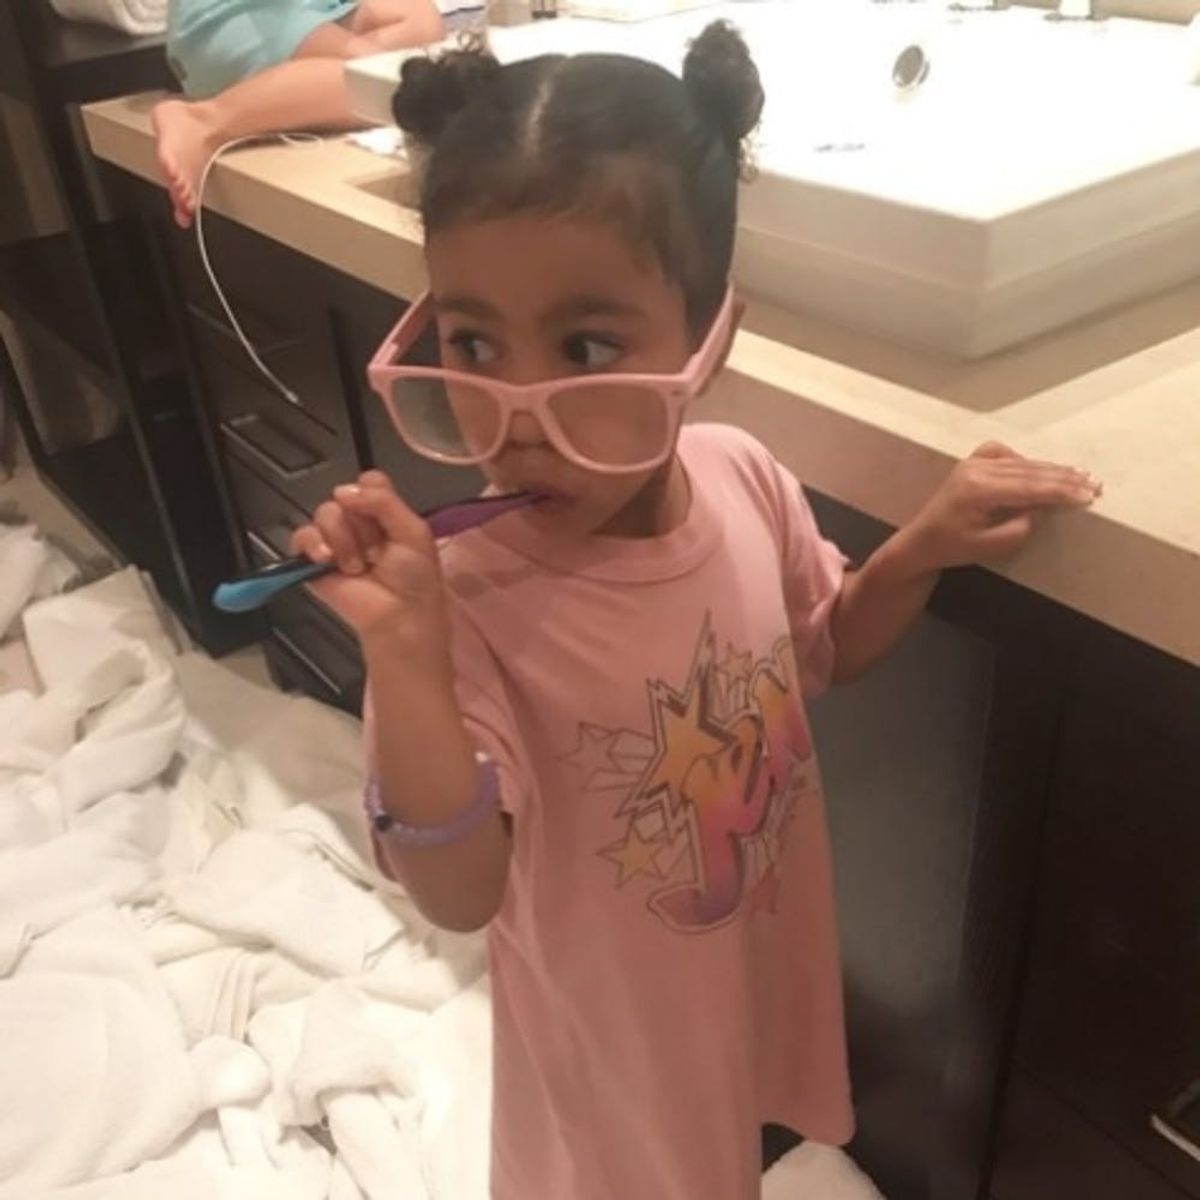 North West Celebrated Her 4th Birthday With Chuck E. Cheese’s and a Slumber Party